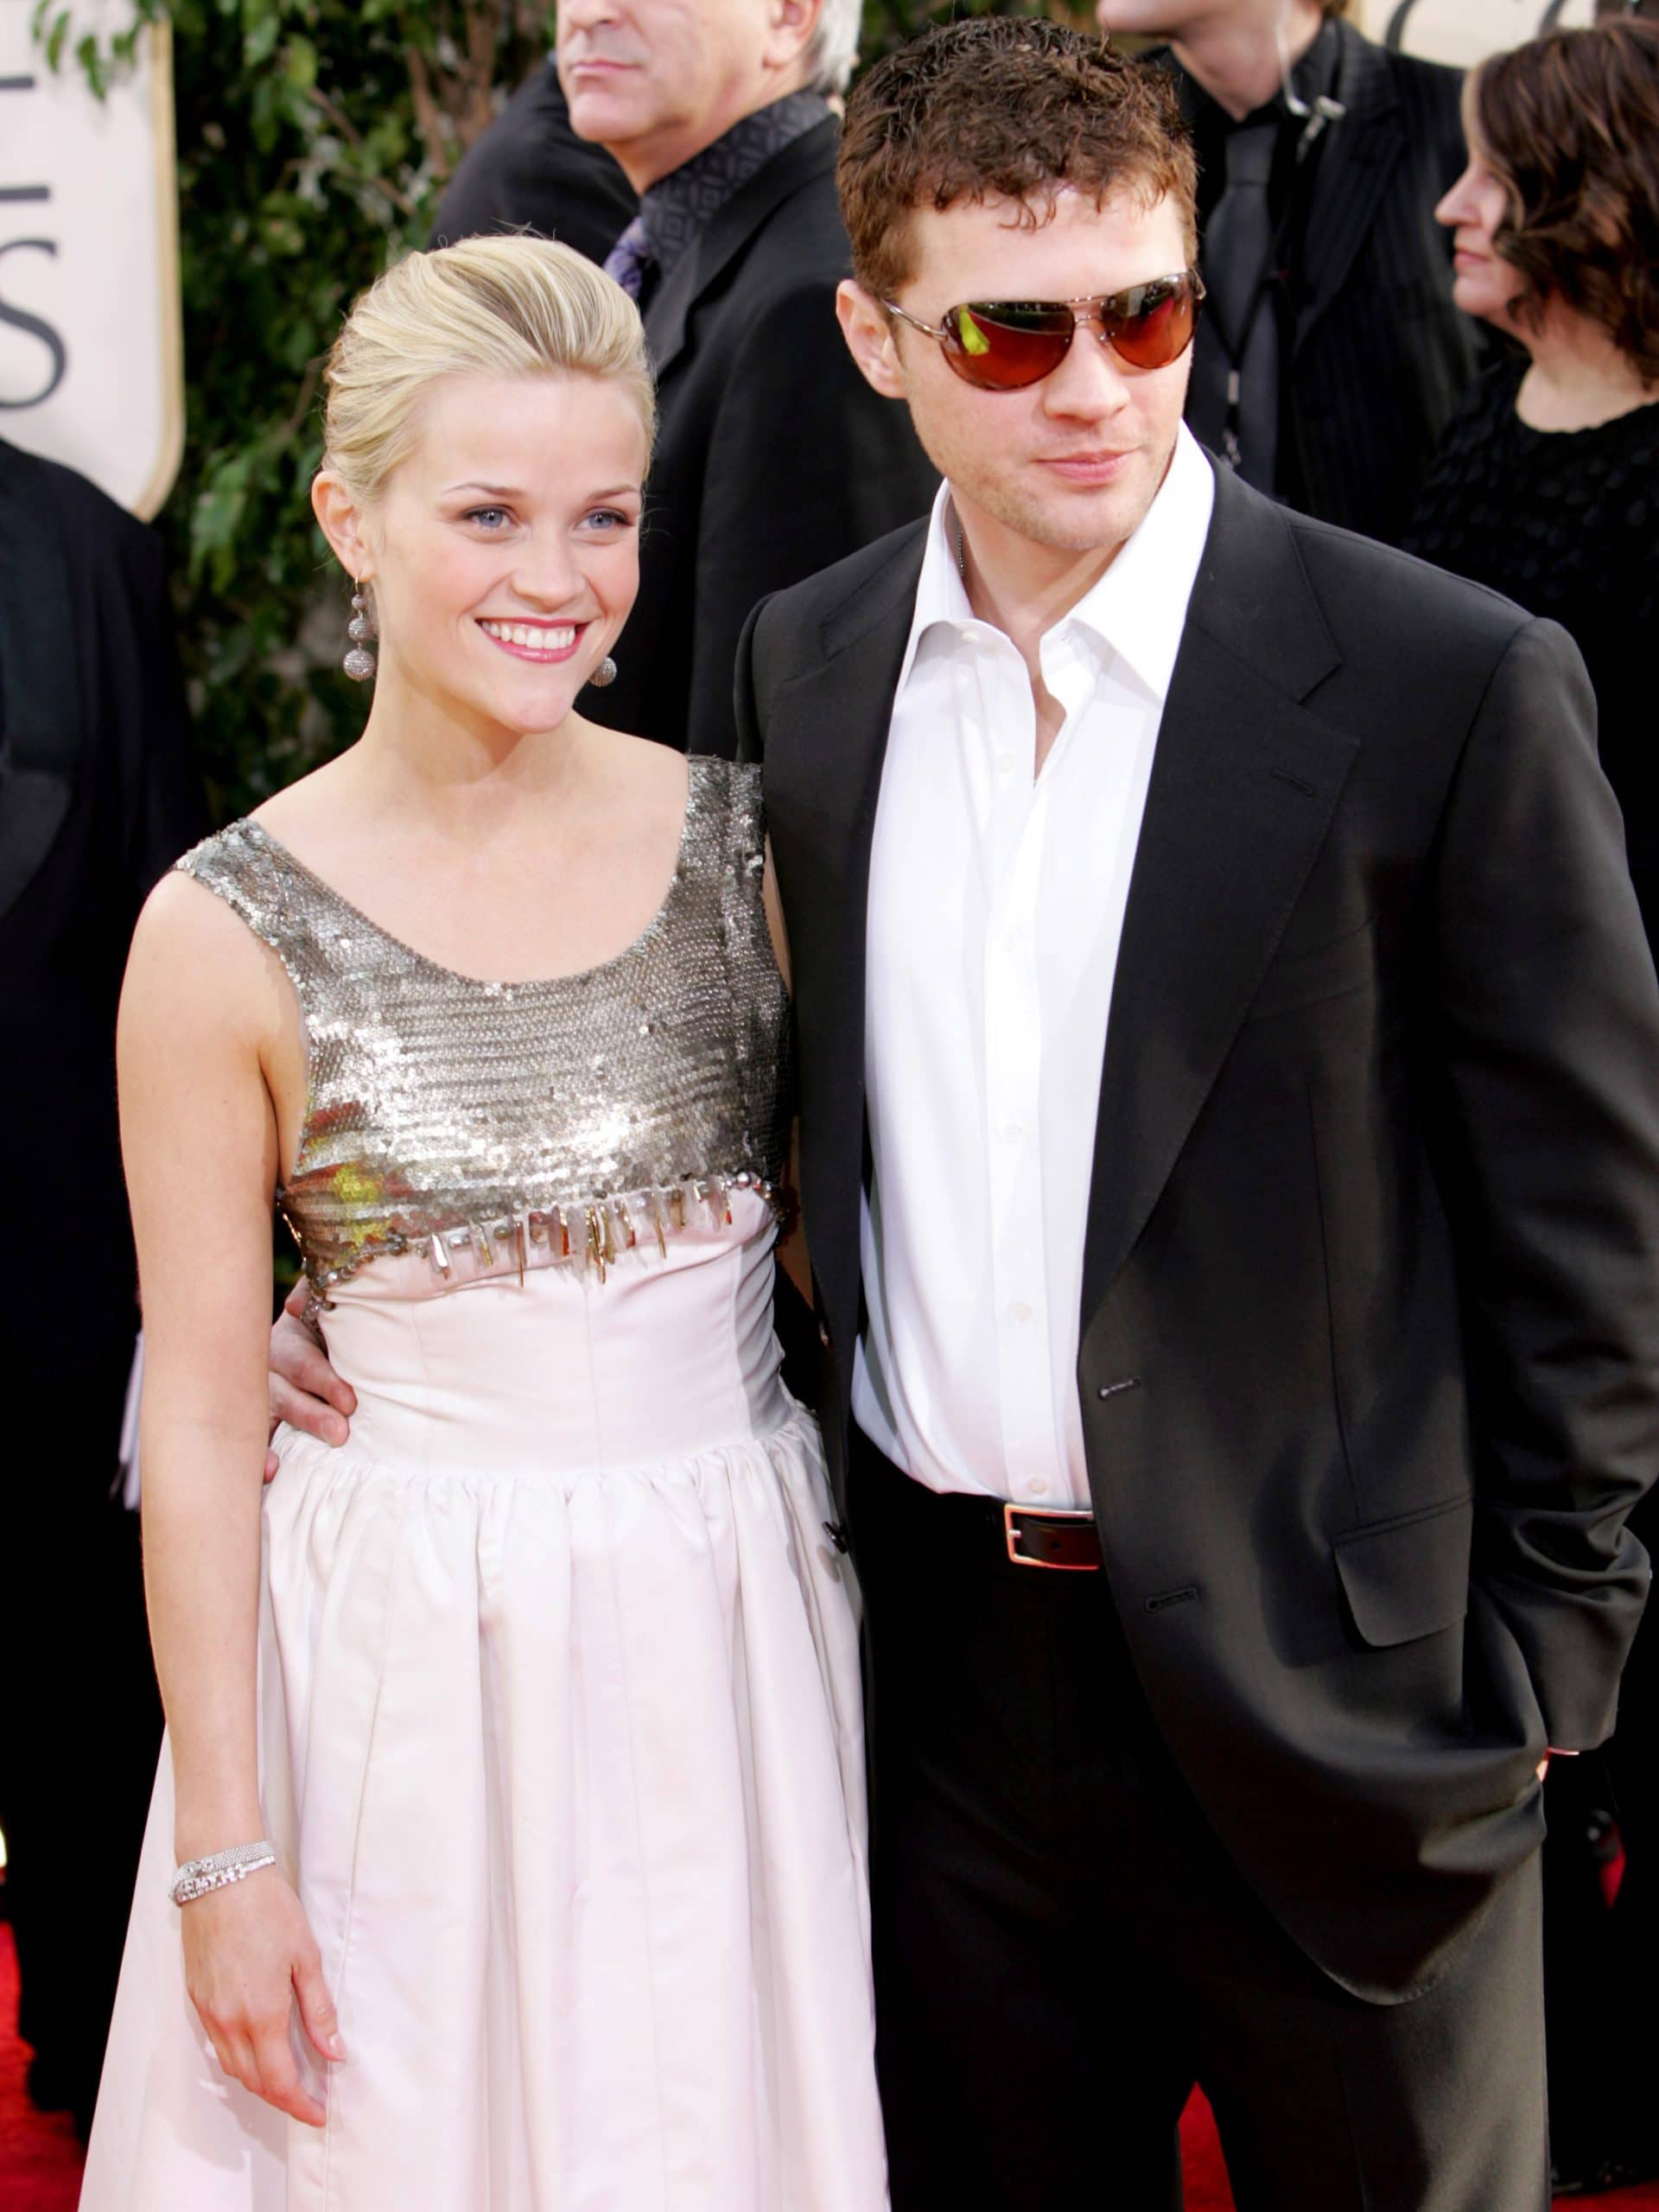 Resse Witherspoon (wearing a vintage couture Chanel dress), Ryan Phillippe on the red carpet at the 63rd annual Golden Globe Awards, Los Angeles, CA, January 16, 2006